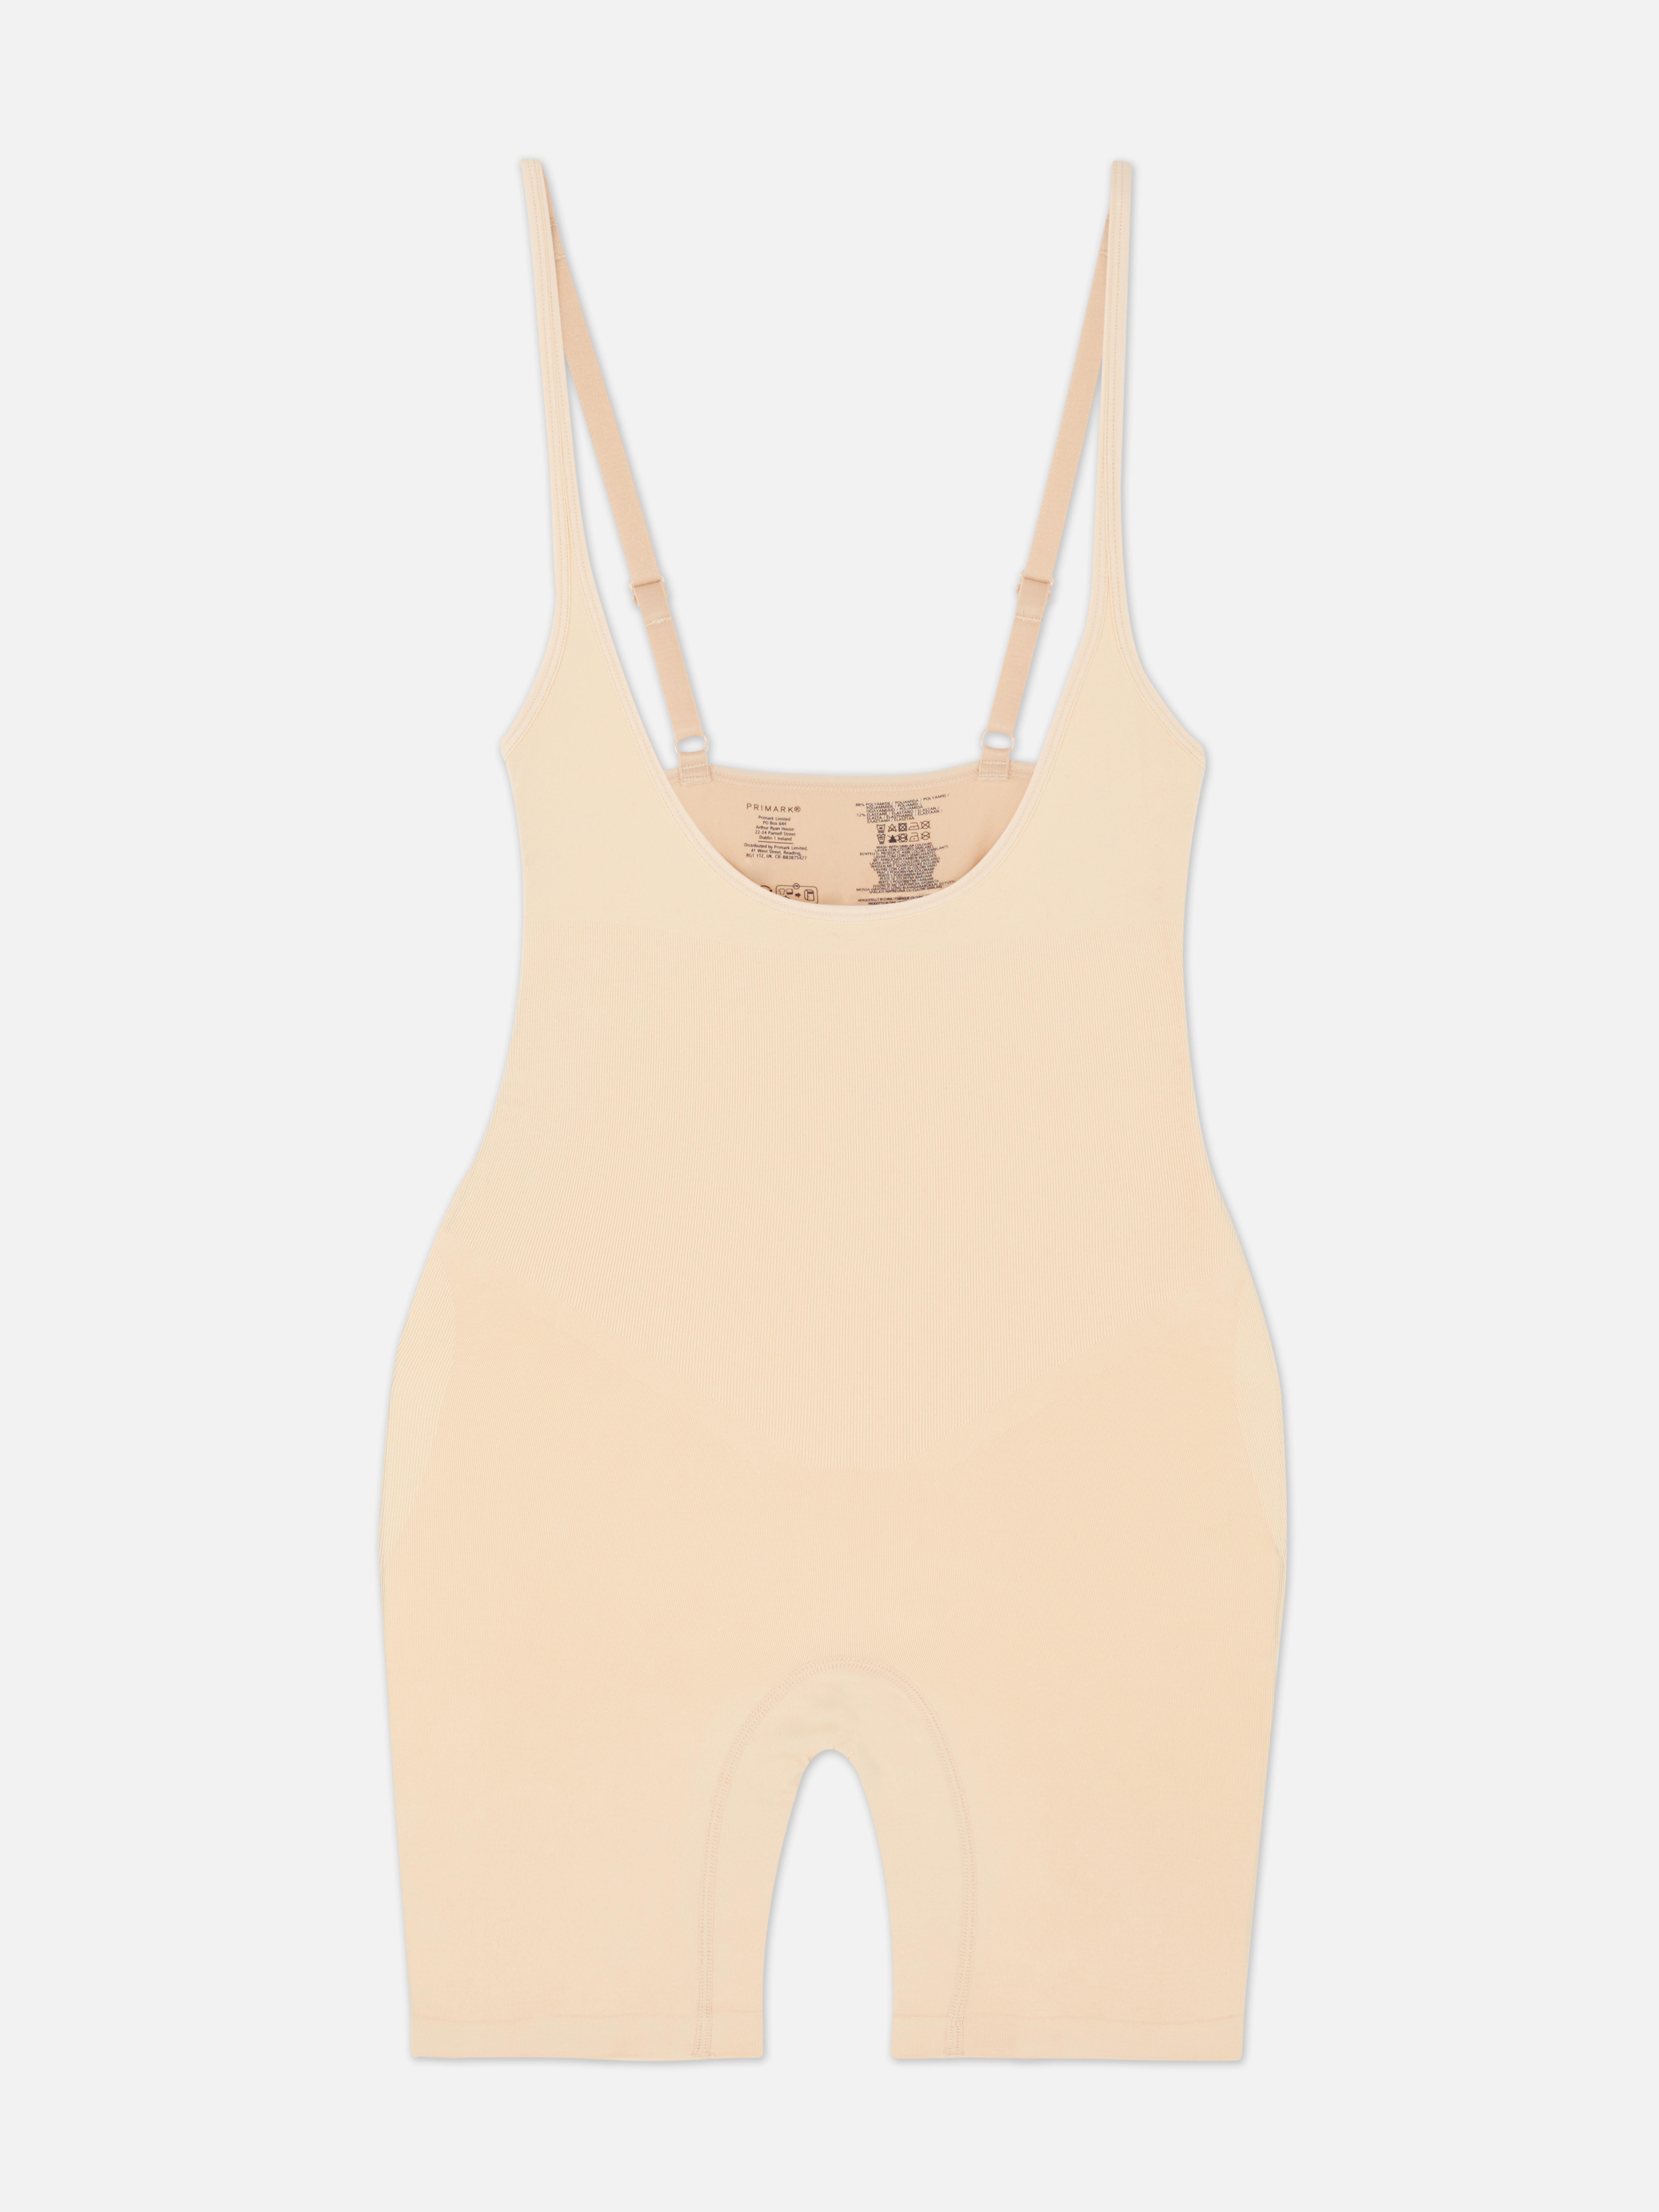 These shecurve bodysuits are super soft and buttery smooth. Get them here:   